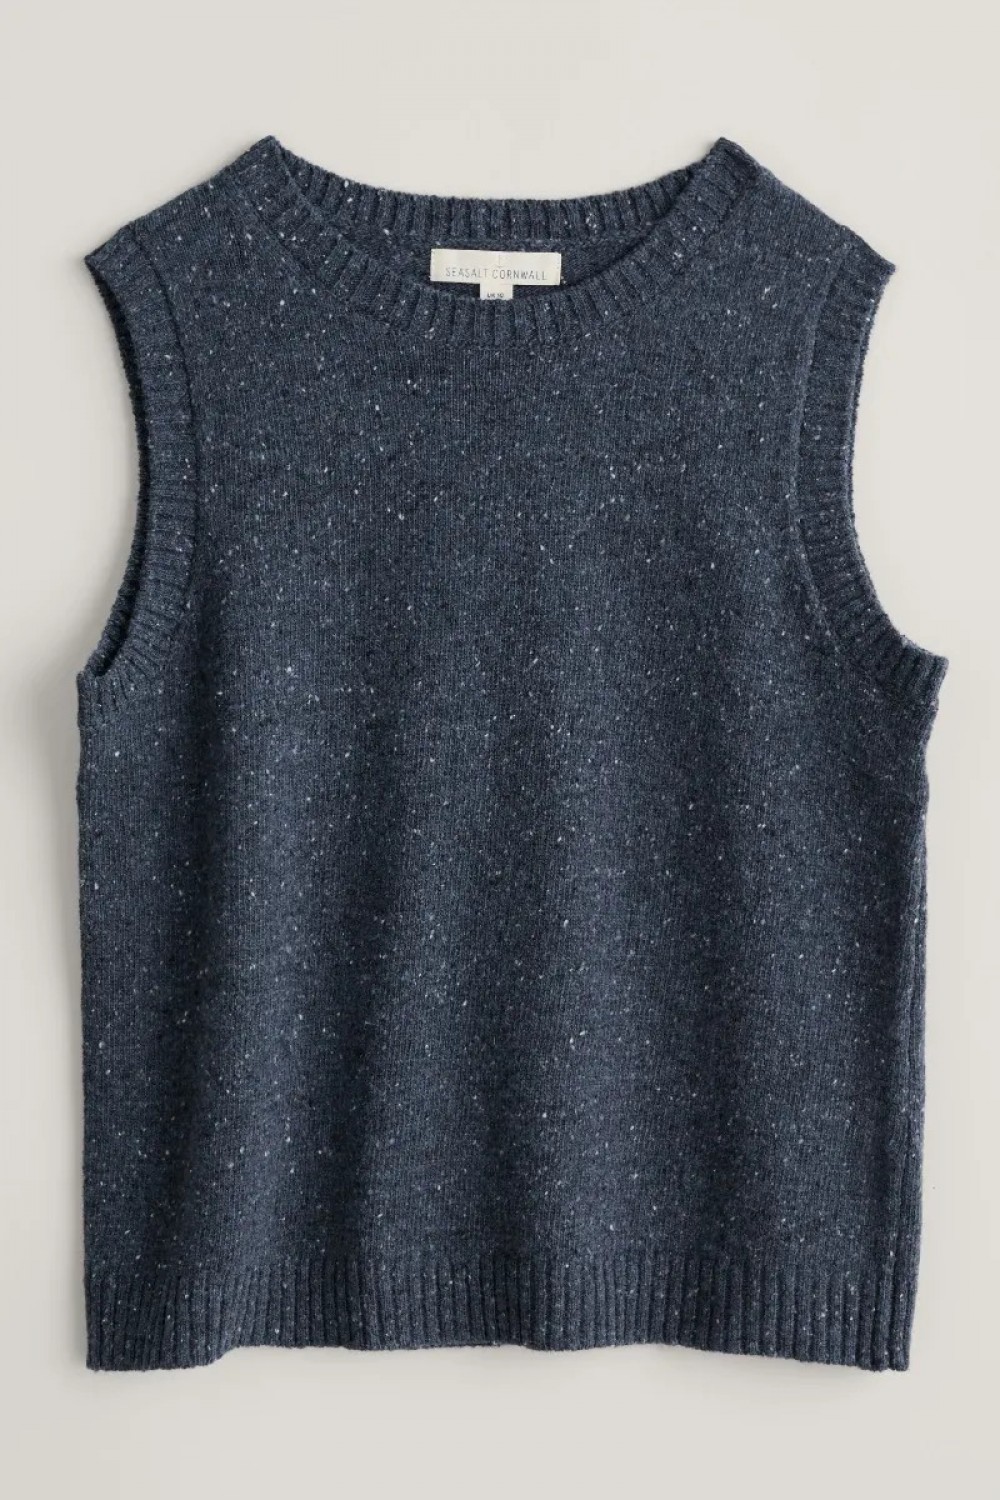 Seasalt Clothing East View Knitted Vest Fathom